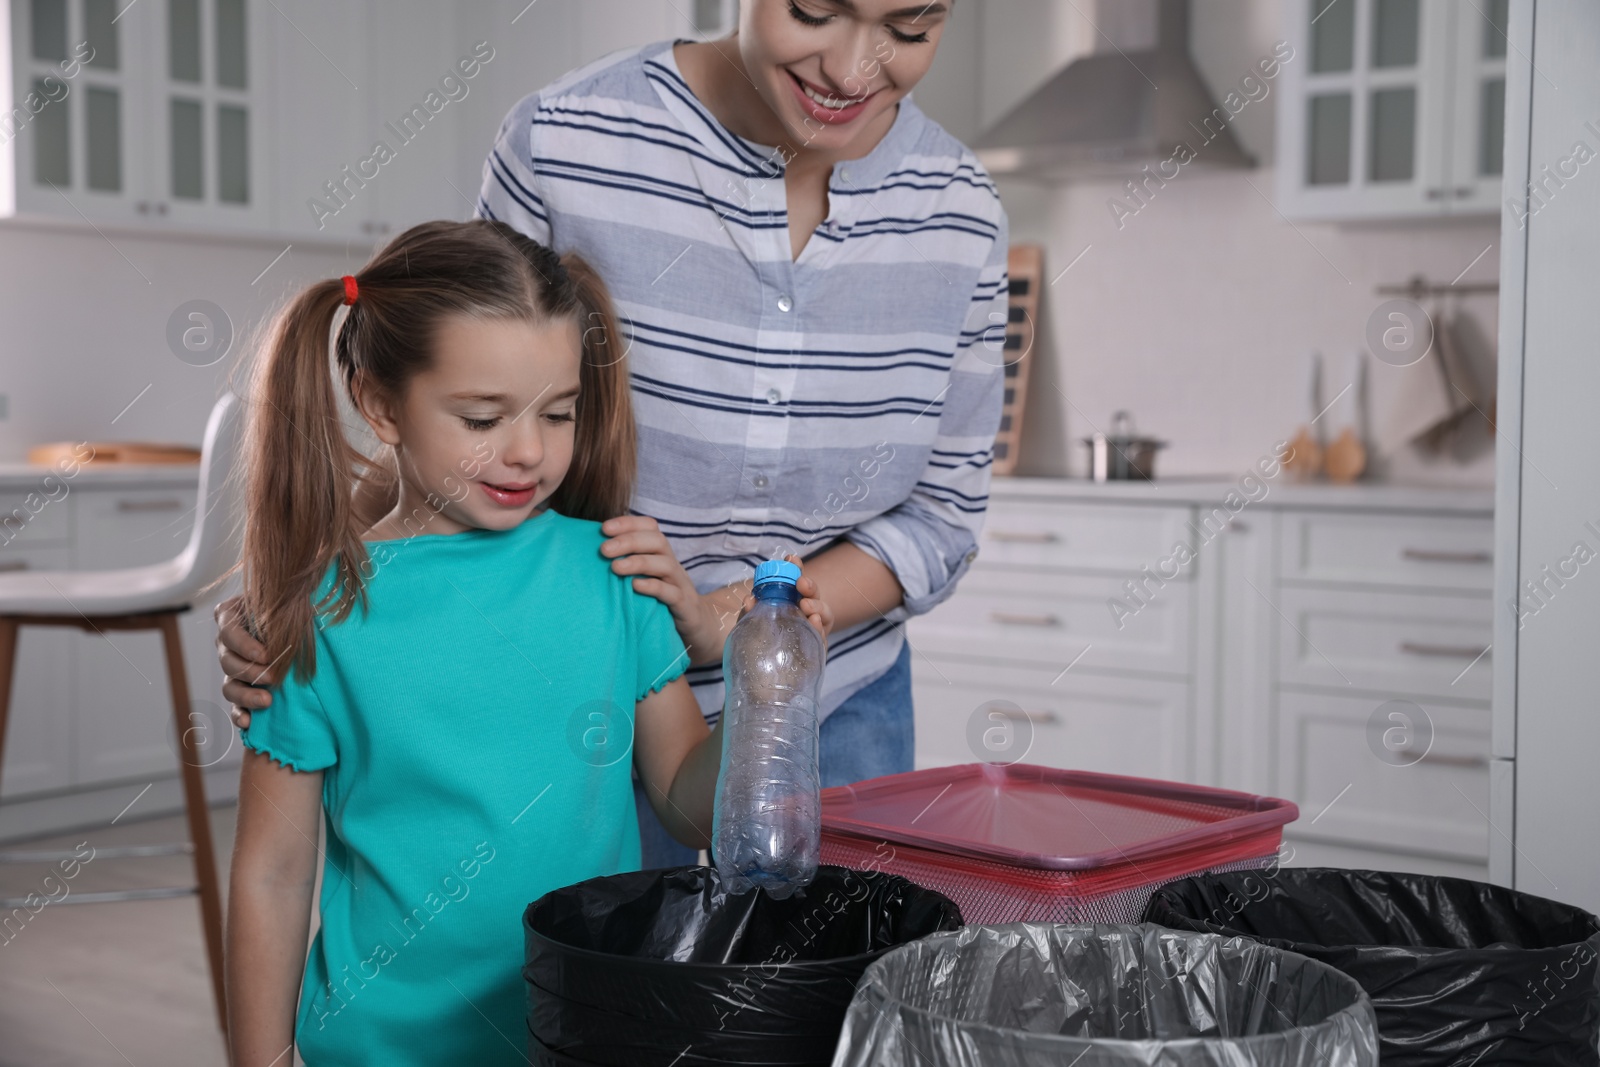 Photo of Young woman and her daughter throwing plastic bottle into trash bin in kitchen. Separate waste collection